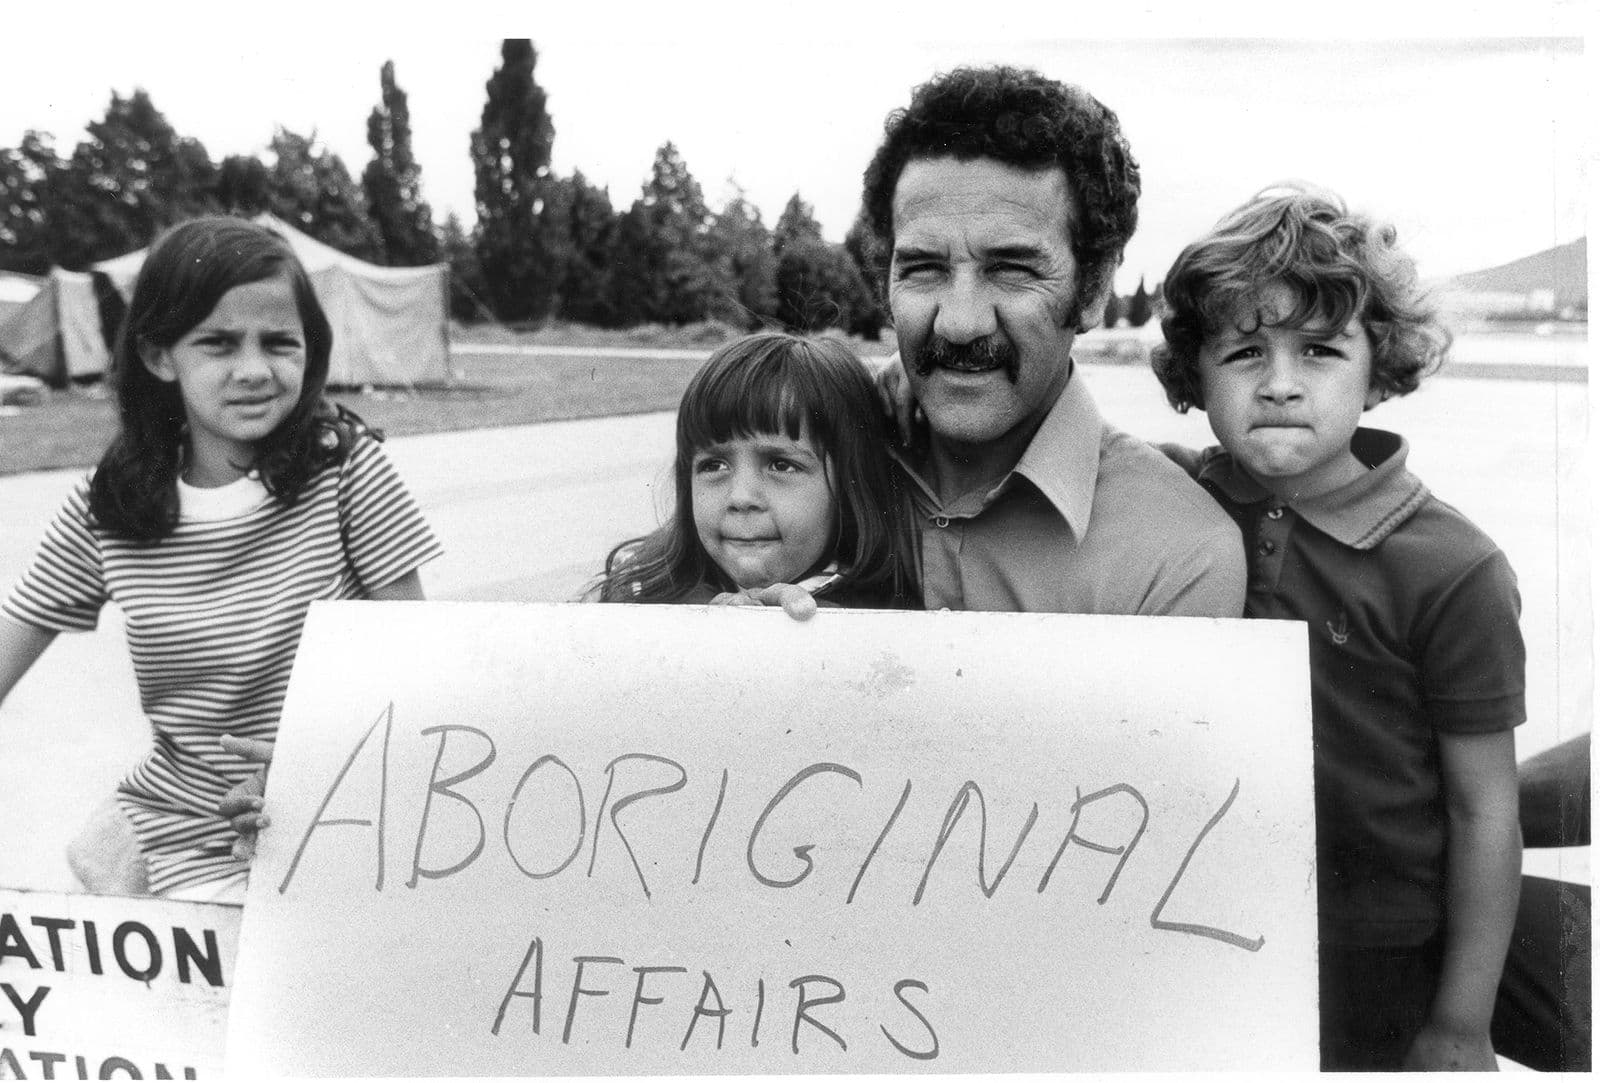 Photograph of three children with their father holding a sign stating "Aboriginal Affairs"